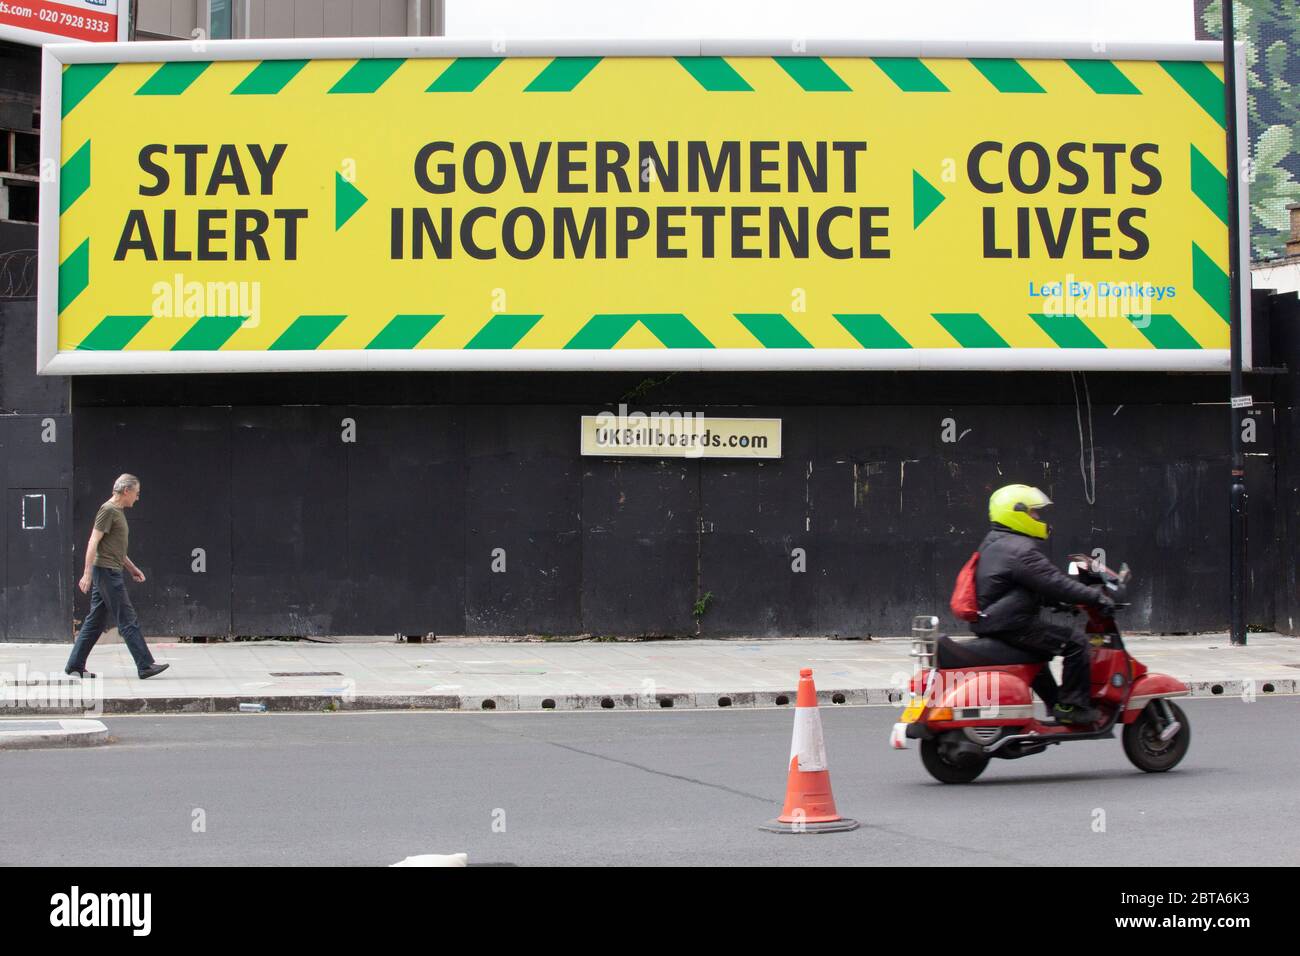 London, UK: 24 May 2020: Campaign group Led By Donkeys erected a pair of billboards spoofing the Government's Stay Alert slogan by adding 'Government Incompetence Costs Lives'. A second poster shows a graph of numbers of deaths in different countries, with the UK having the second highest number of deaths globally, after the USA. Anna Watson/Alamy Llive News Stock Photo